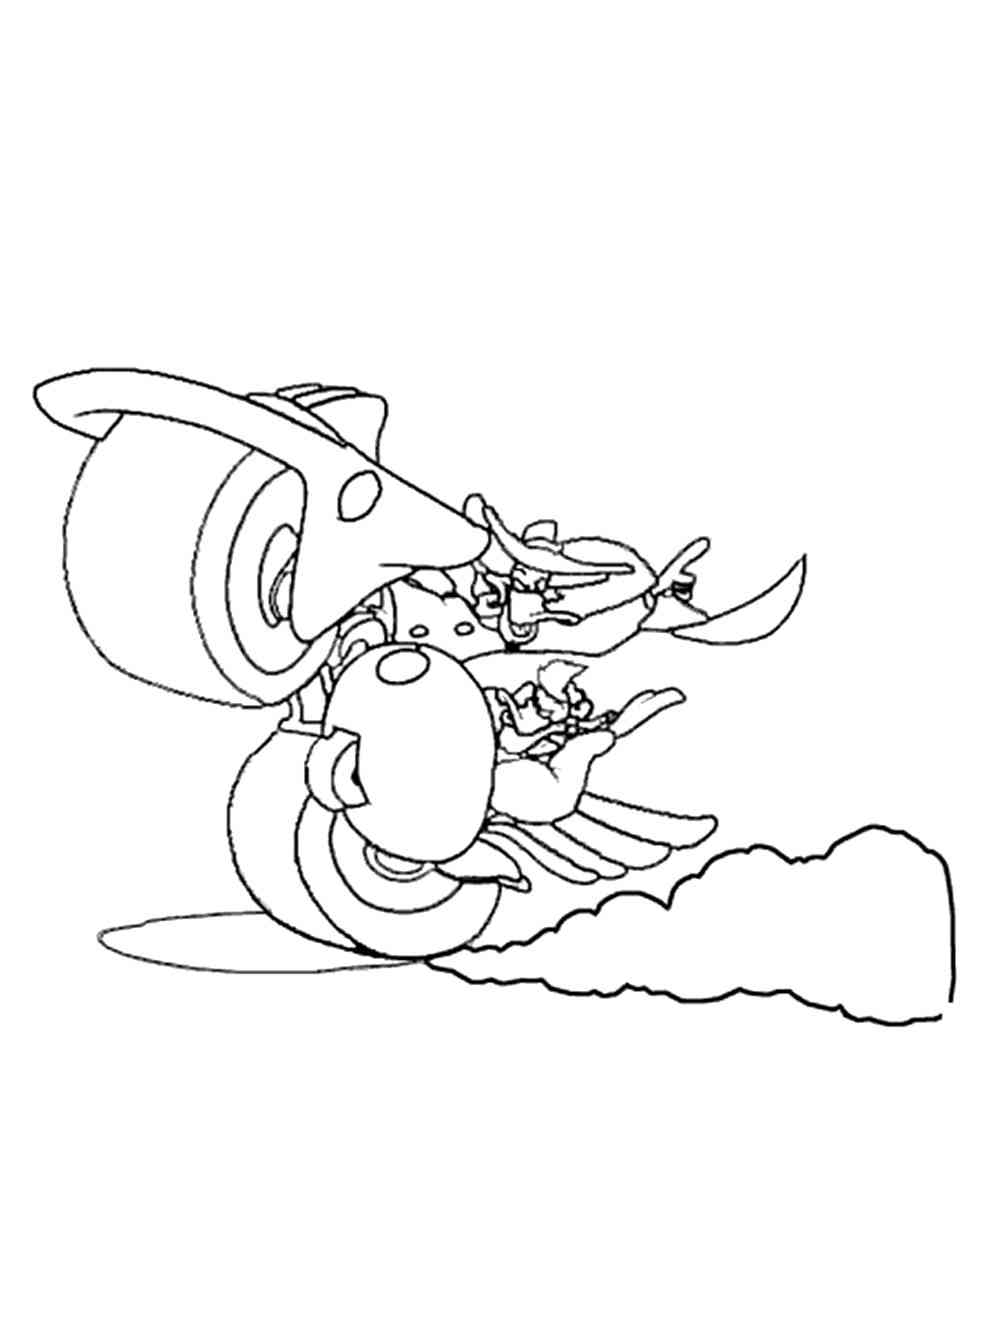 Darkwing Duck 6 coloring page